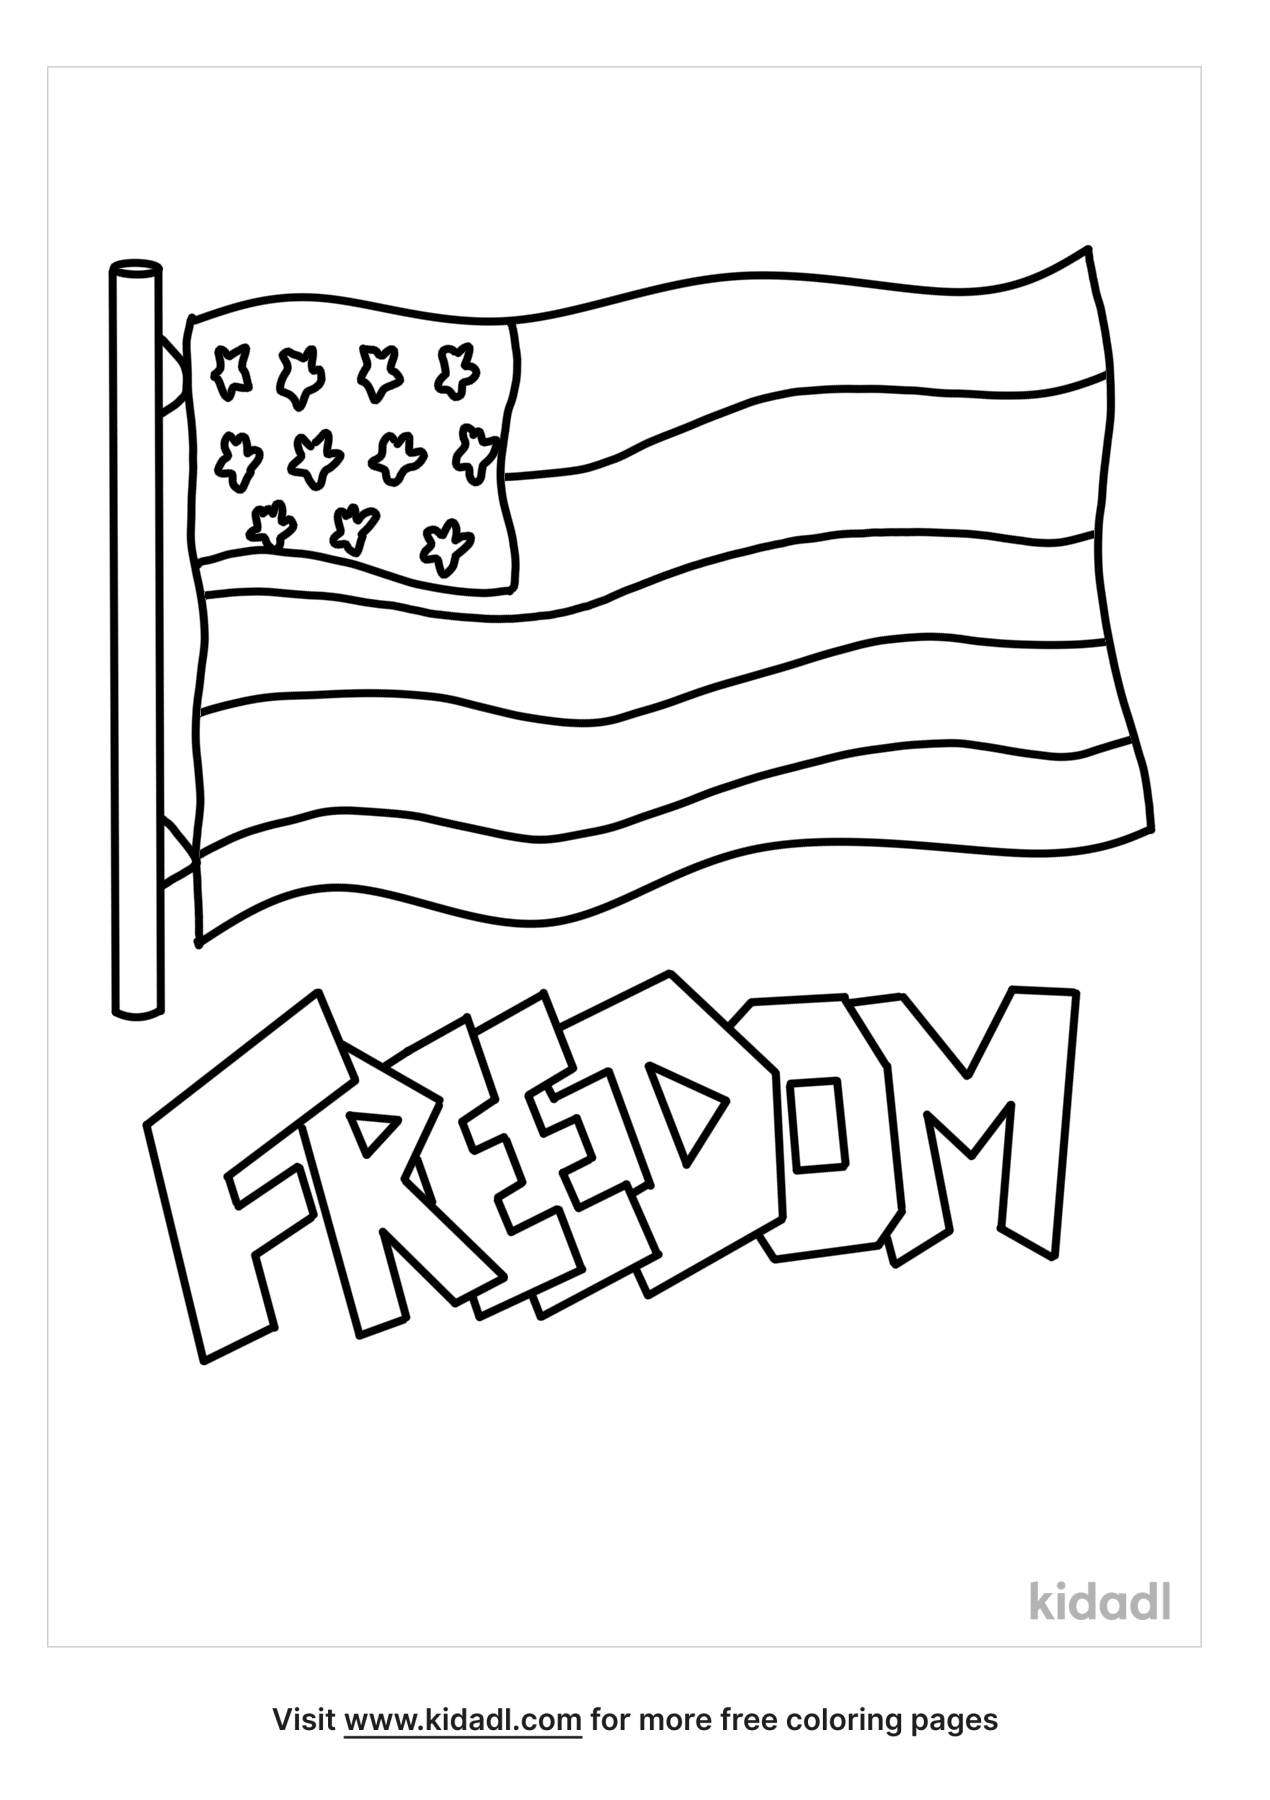 Freedom Coloring Pages - Coloring Home